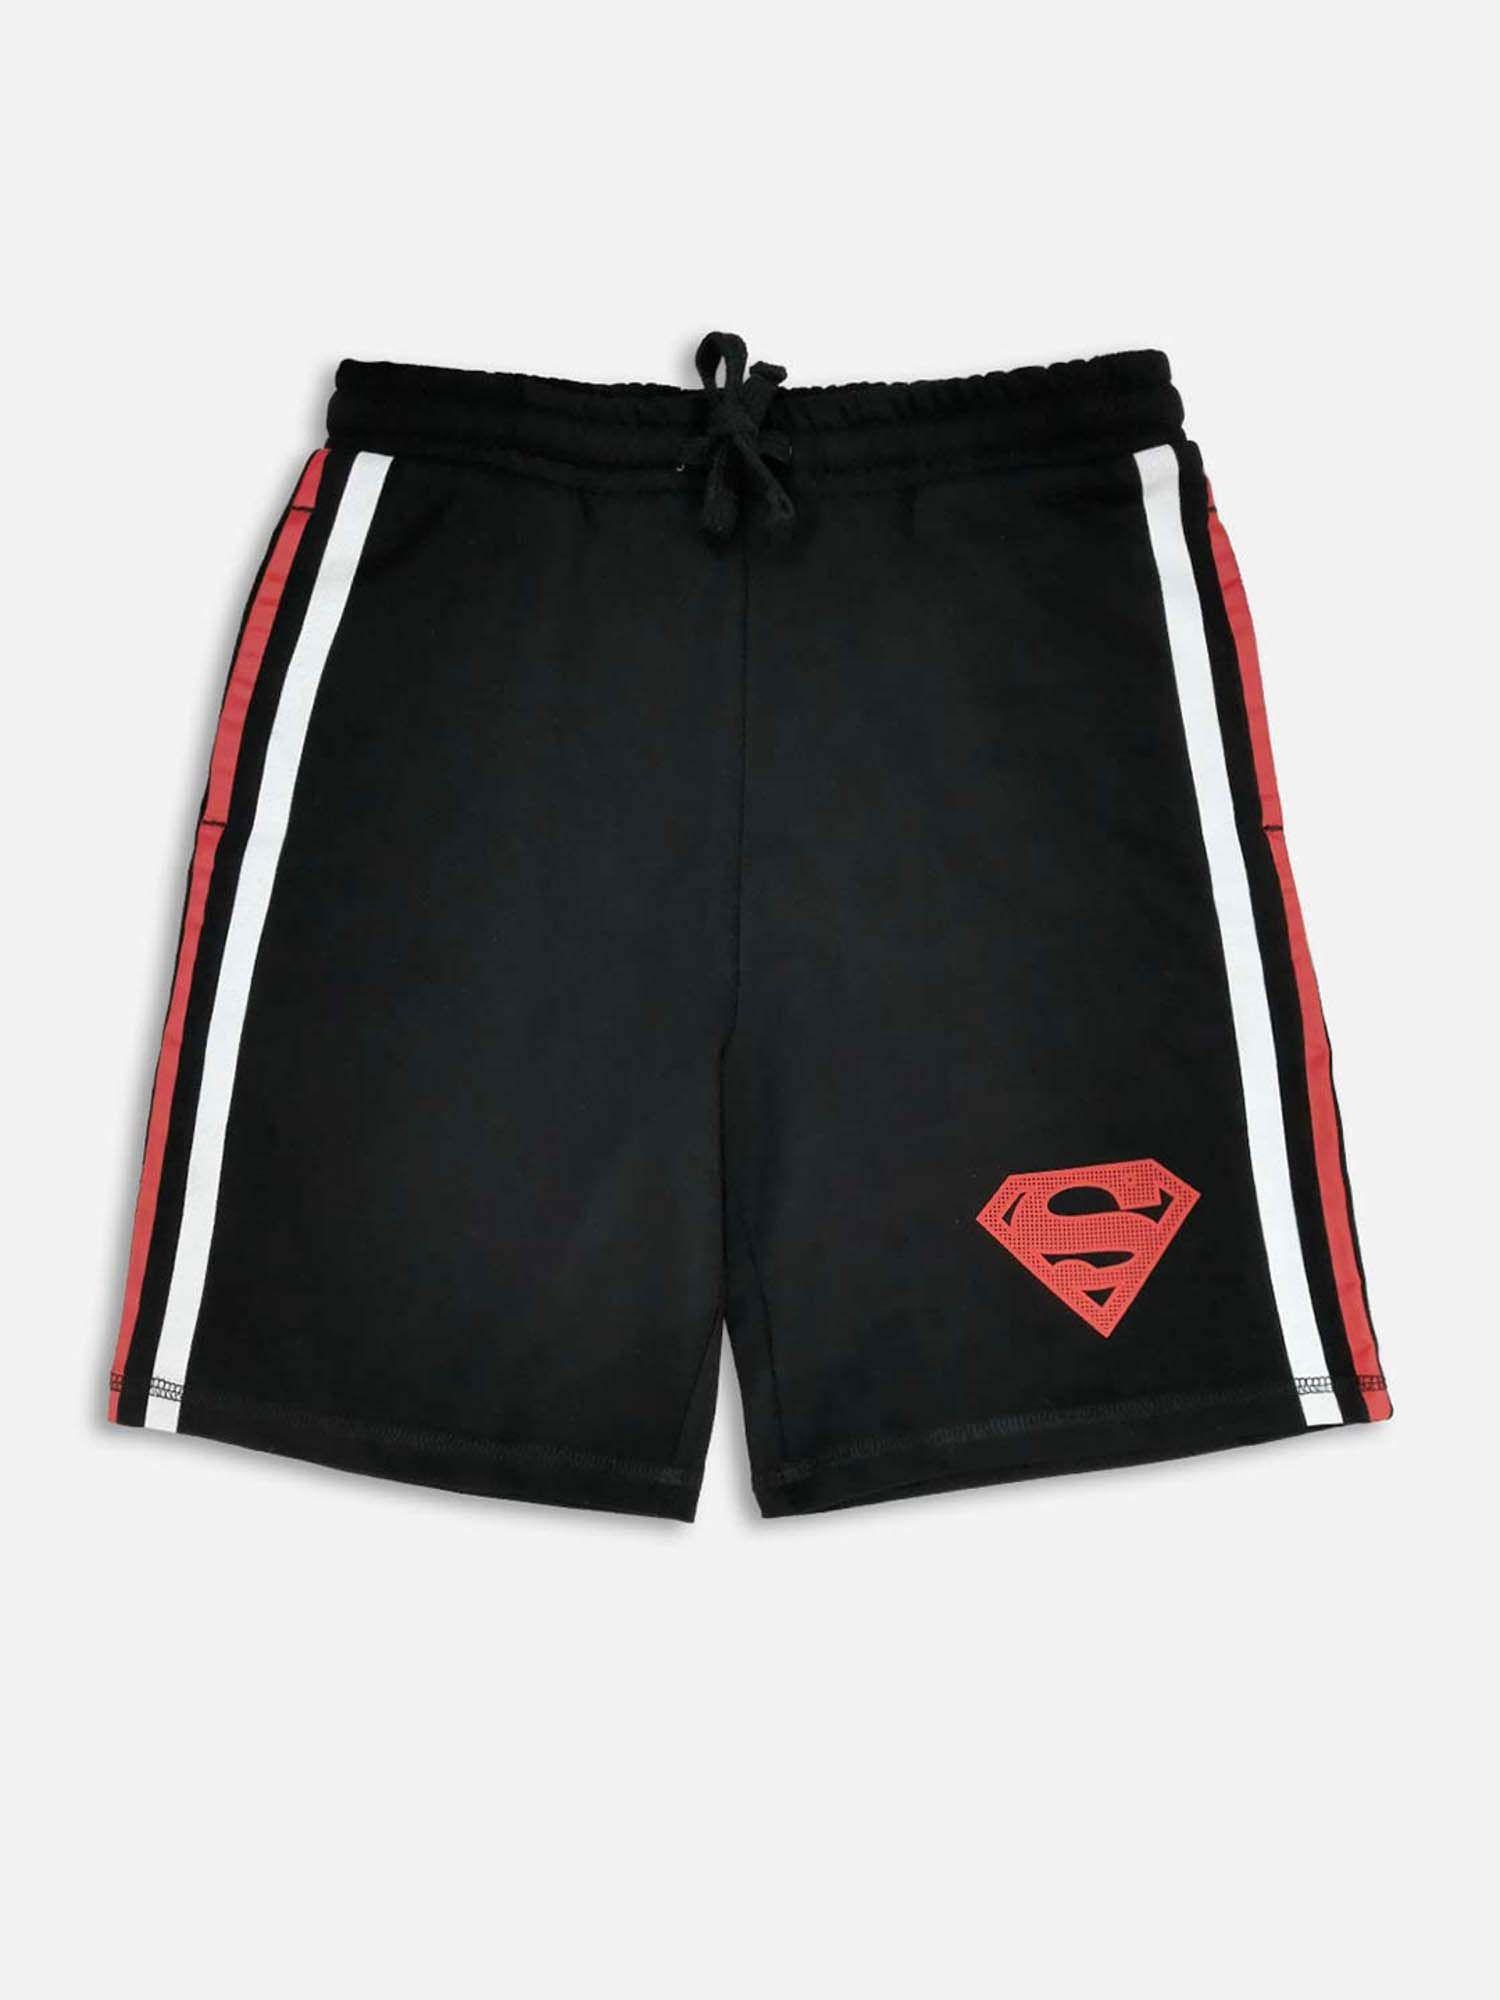 superman featured shorts for boys - black